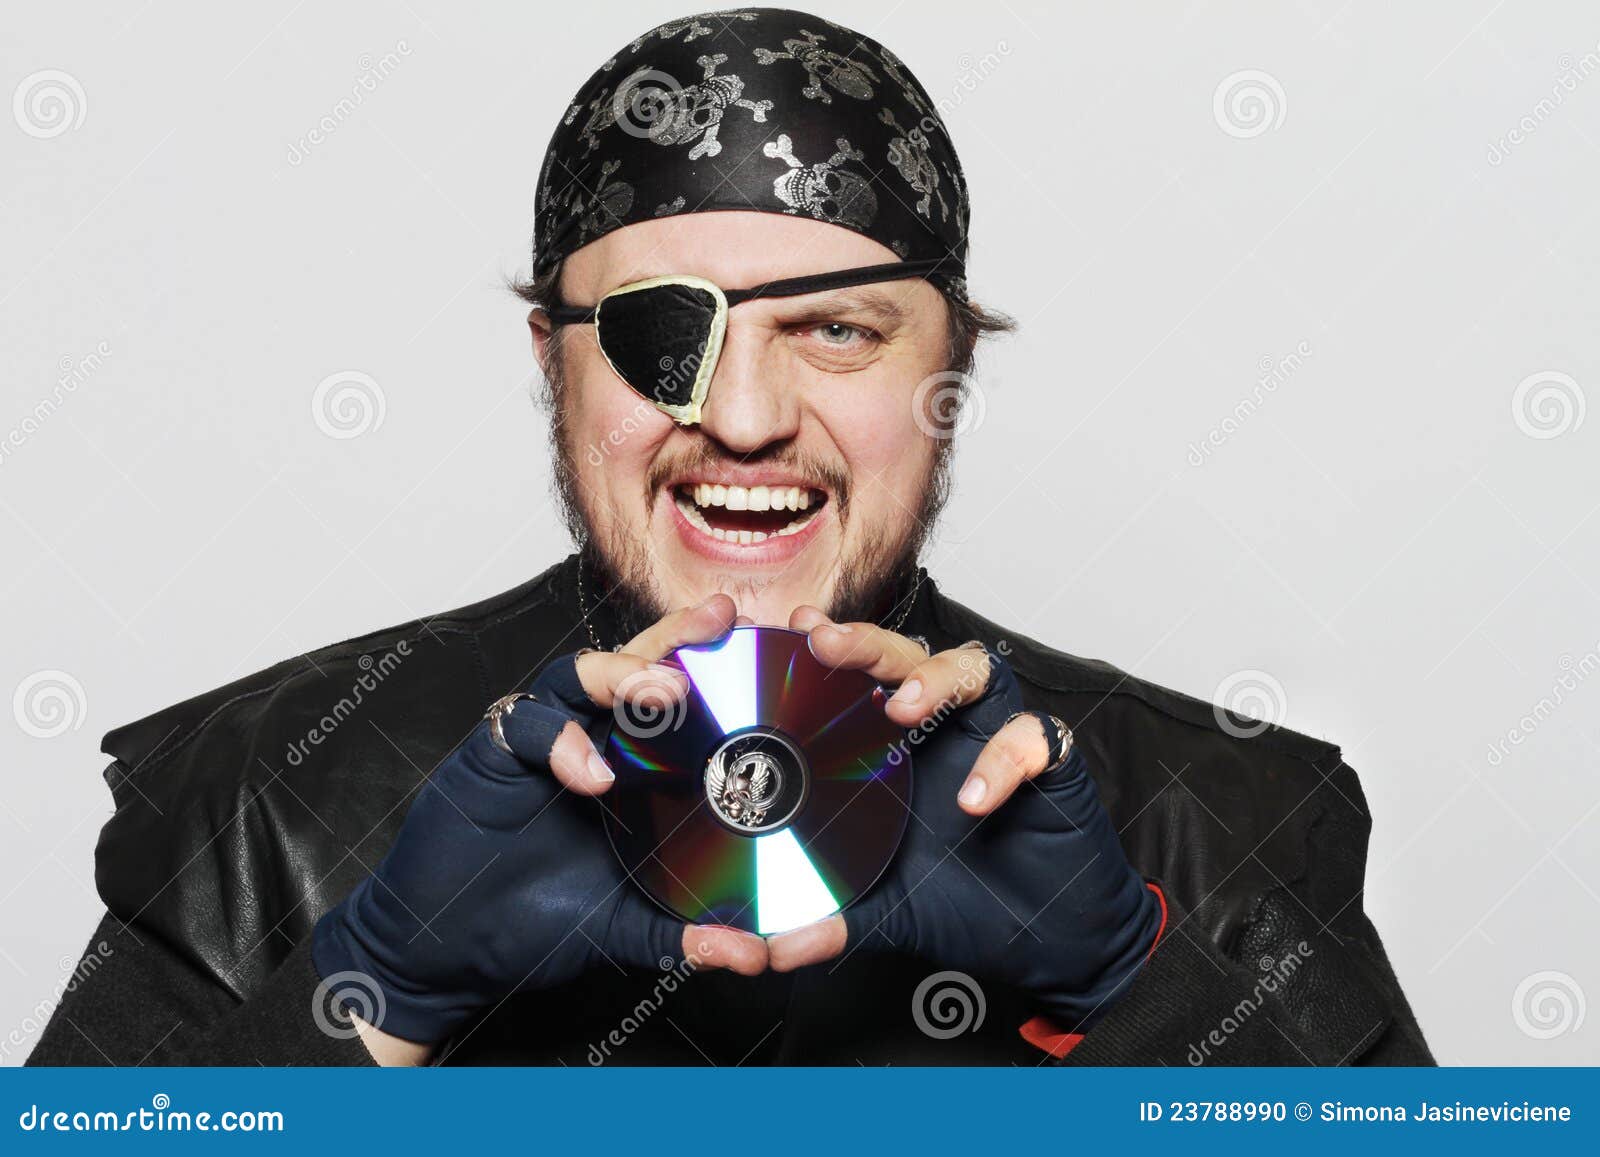 Concept of Man As Internet Pirate Stock Photo - Image security, identity: